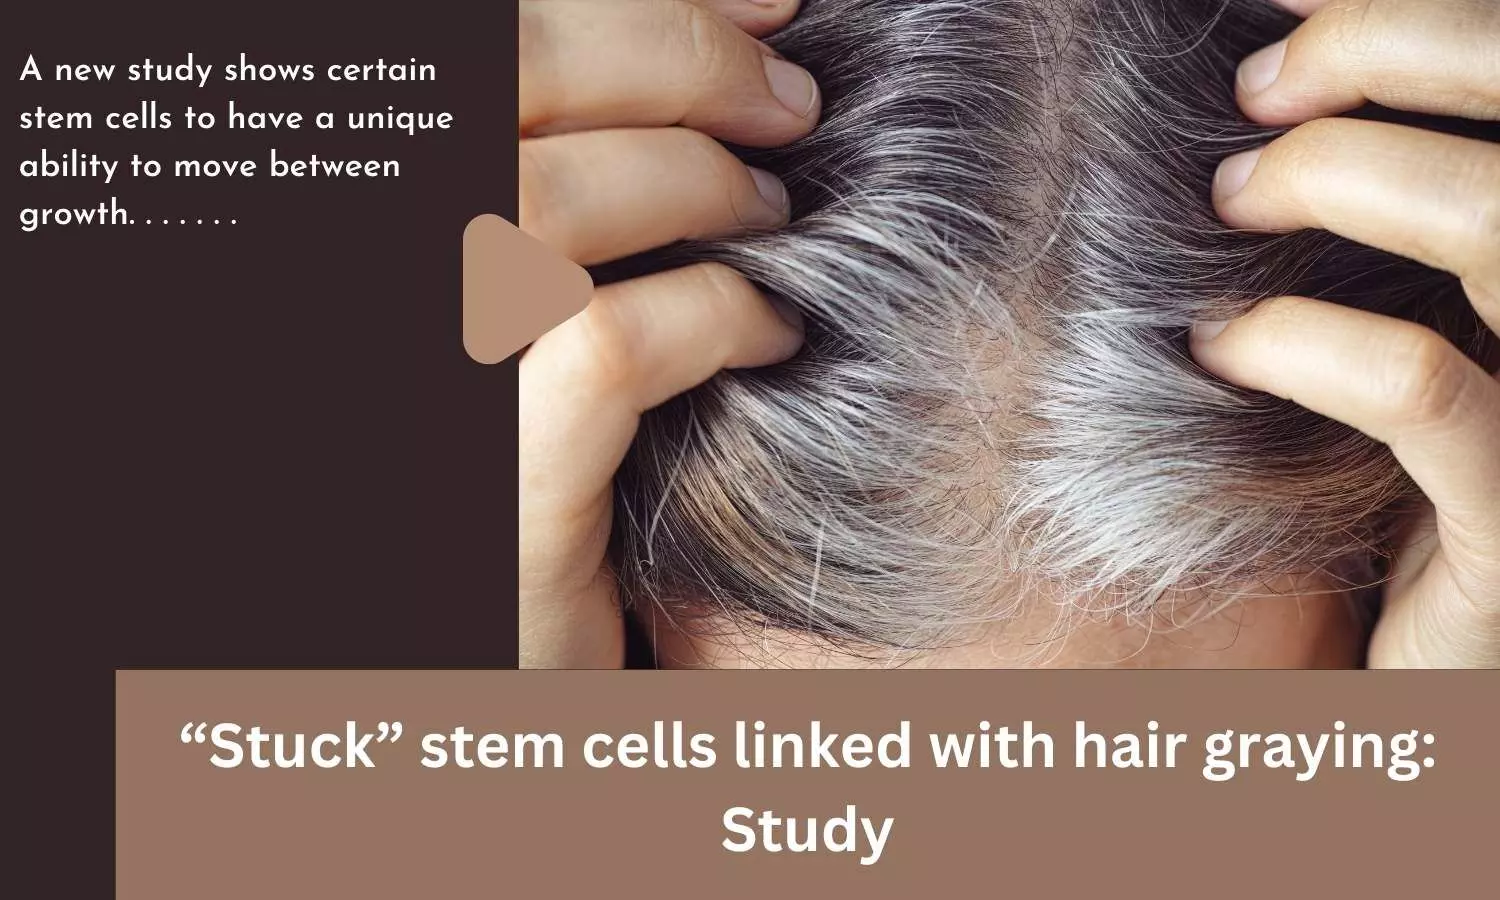 Stuck stem cells linked with hair graying: Study